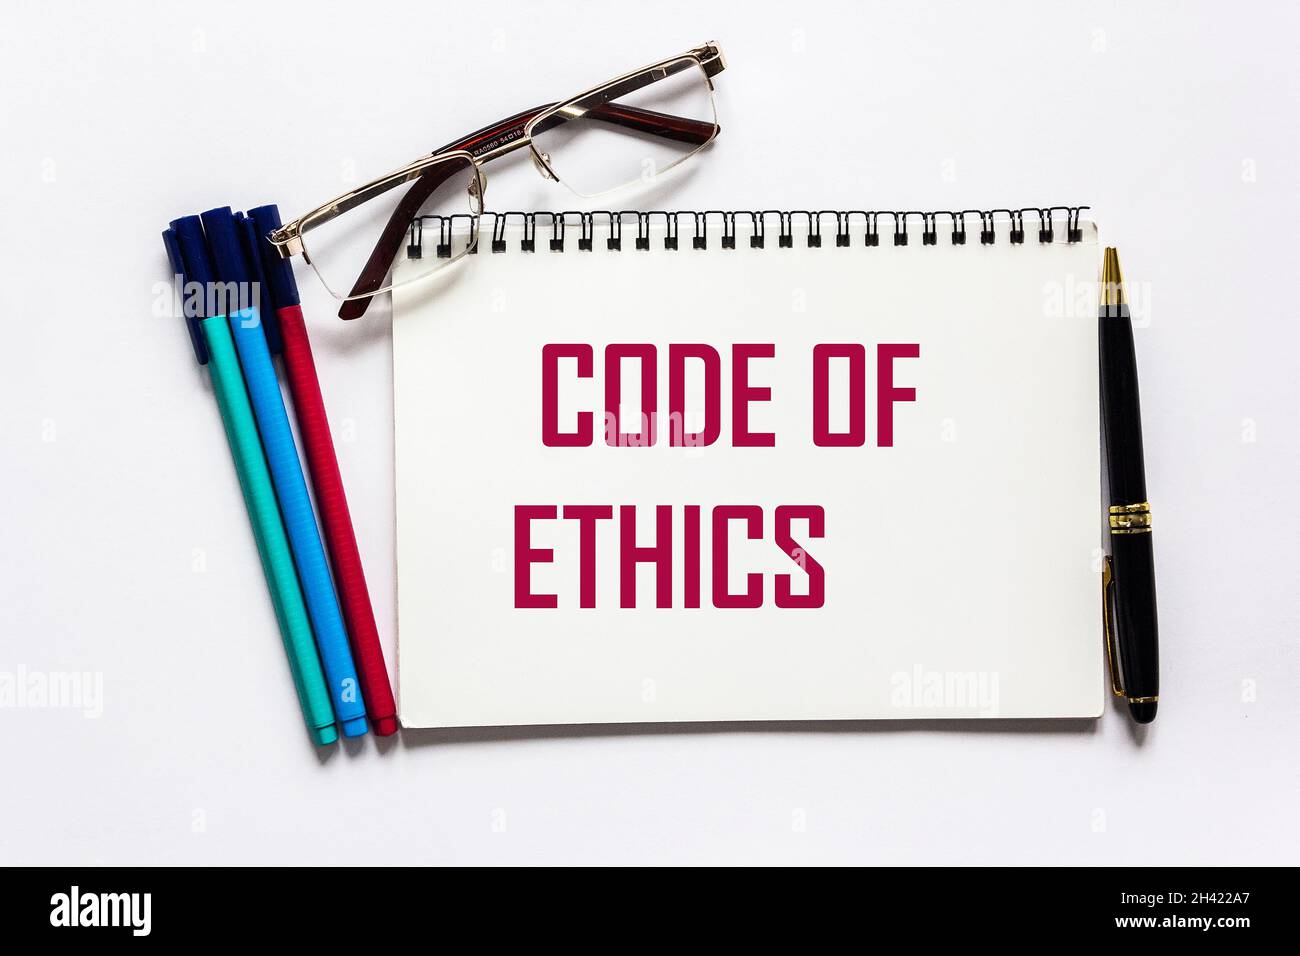 Code of ethics word written on a notebook and a white background, near felt-tip pens, a pen and glasses. Stock Photo